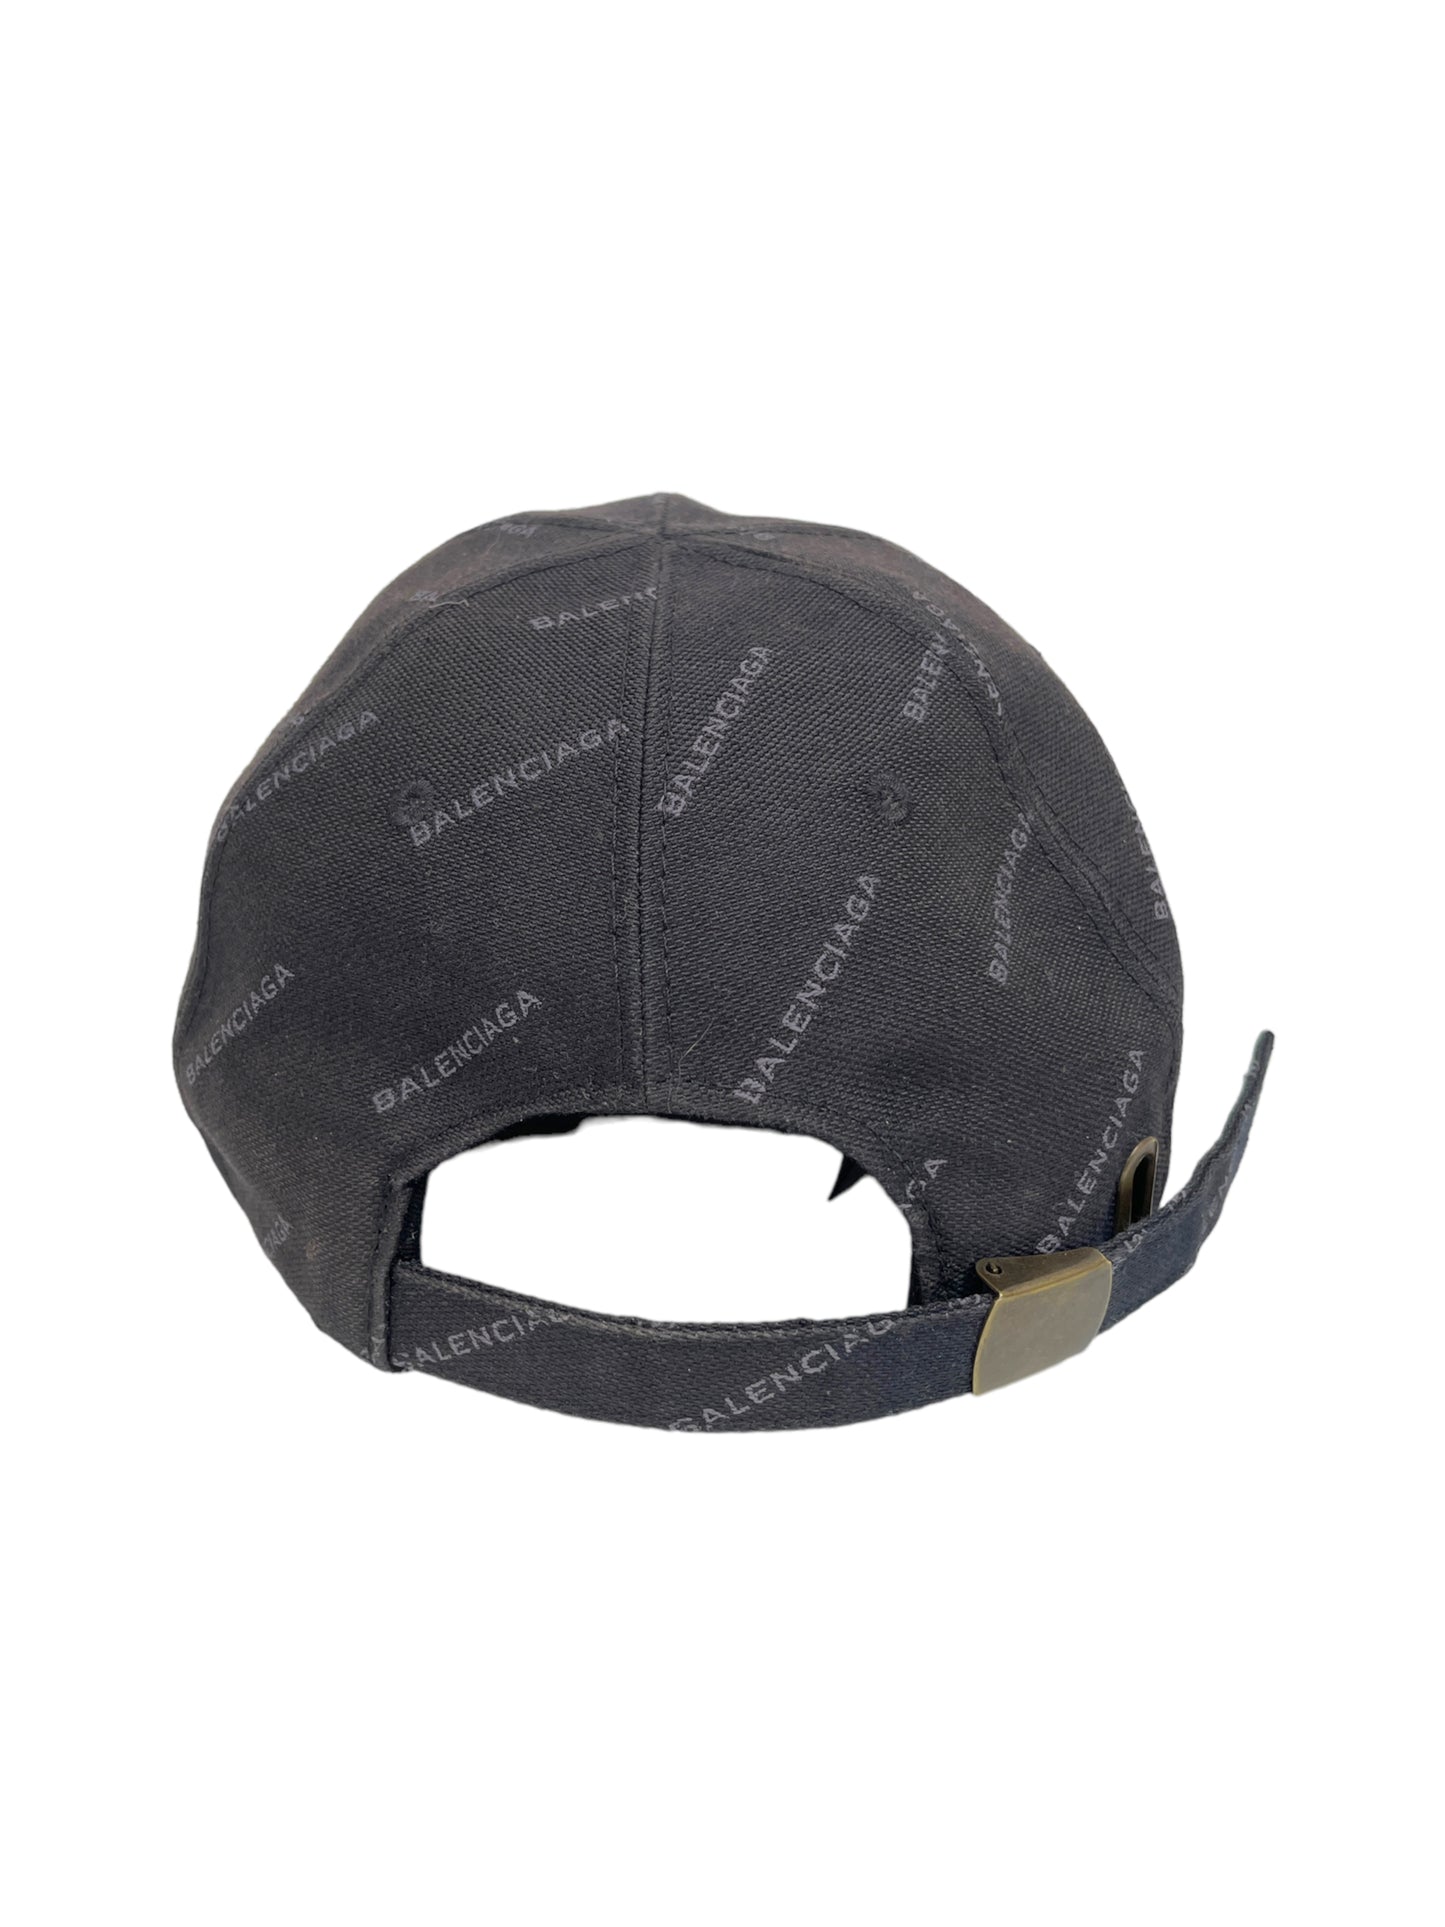 Balenciaga Black Repeating Logo Baseball Cap — Genuine Design luxury consignment Calgary, Alberta, Canada New and pre-owned clothing, shoes, accessories.